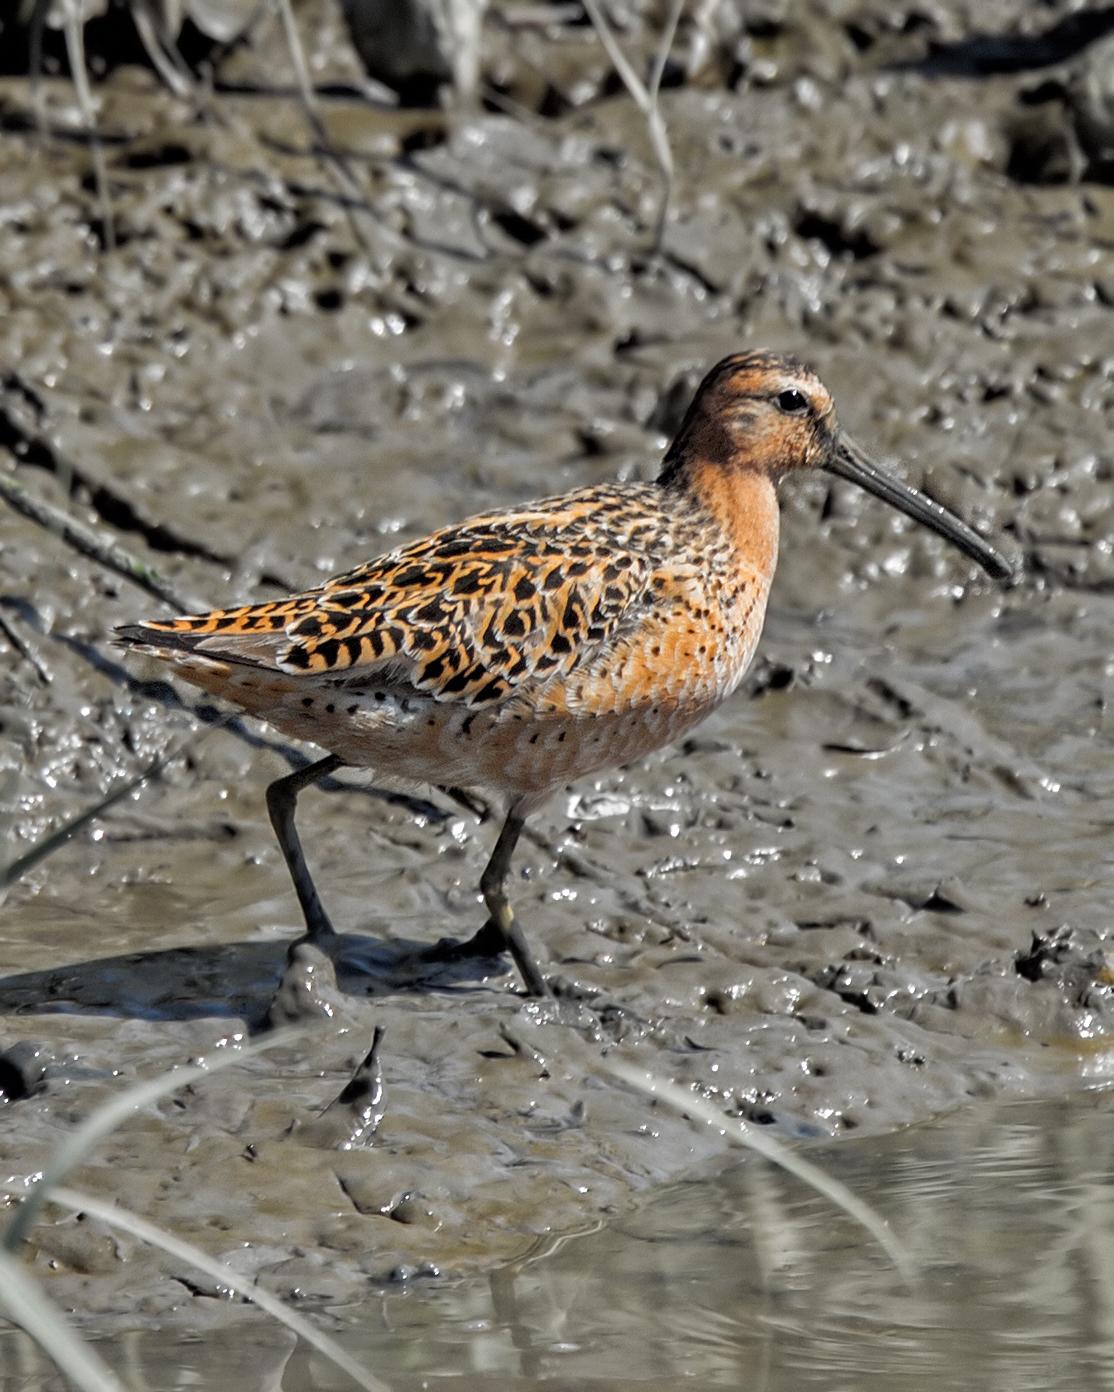 Short-billed Dowitcher Photo by JC Knoll